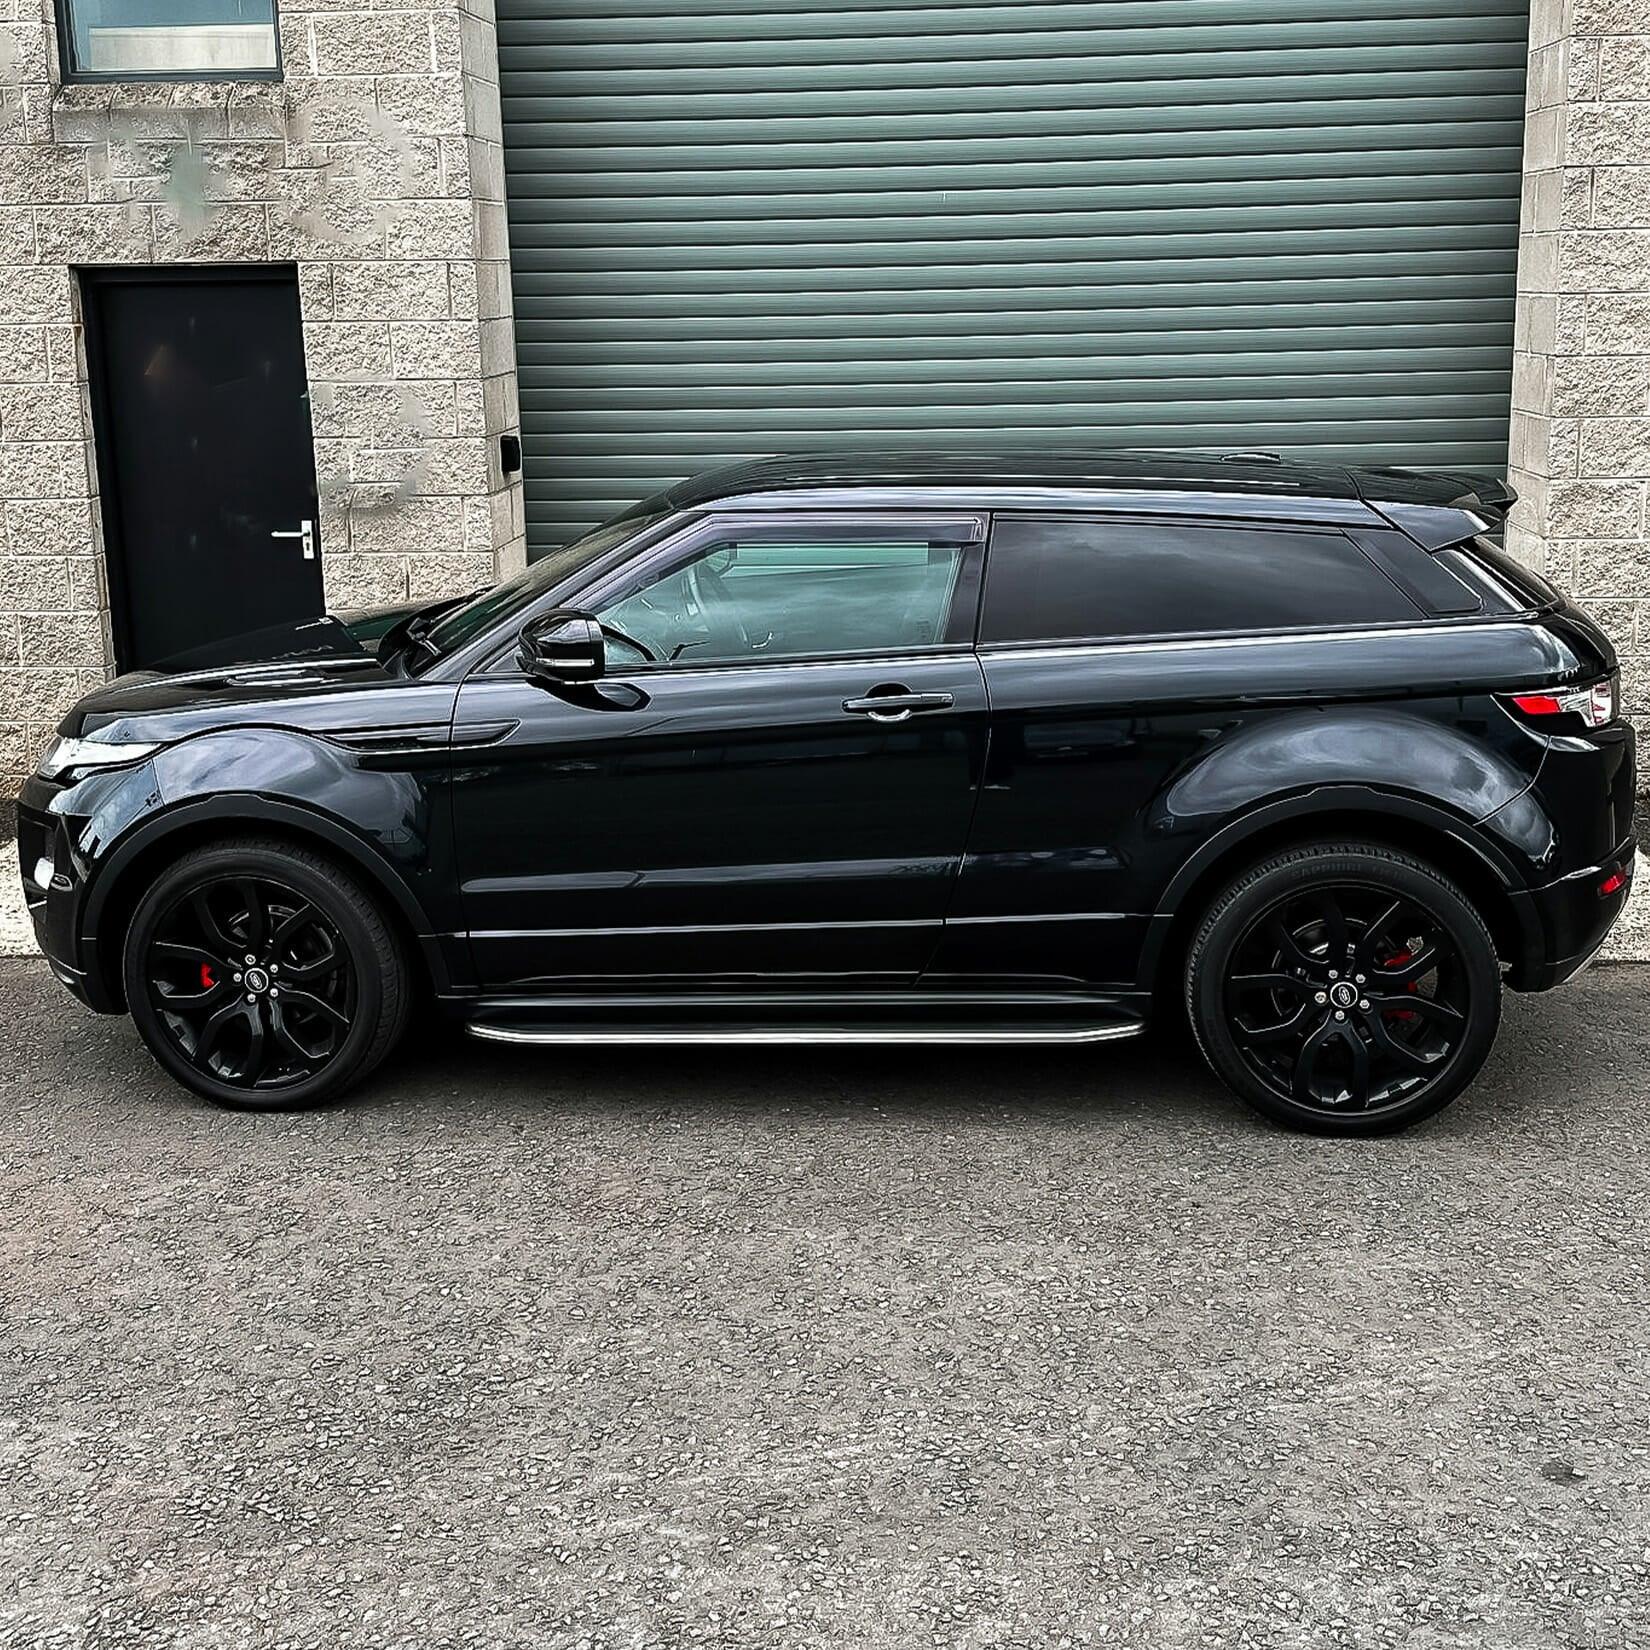 RANGE ROVER EVOQUE L538 - 2011 - 2019 - DYNAMIC OE STYLE RUNNING BOARDS - SIDE STEPS - PAIR - Storm Xccessories2